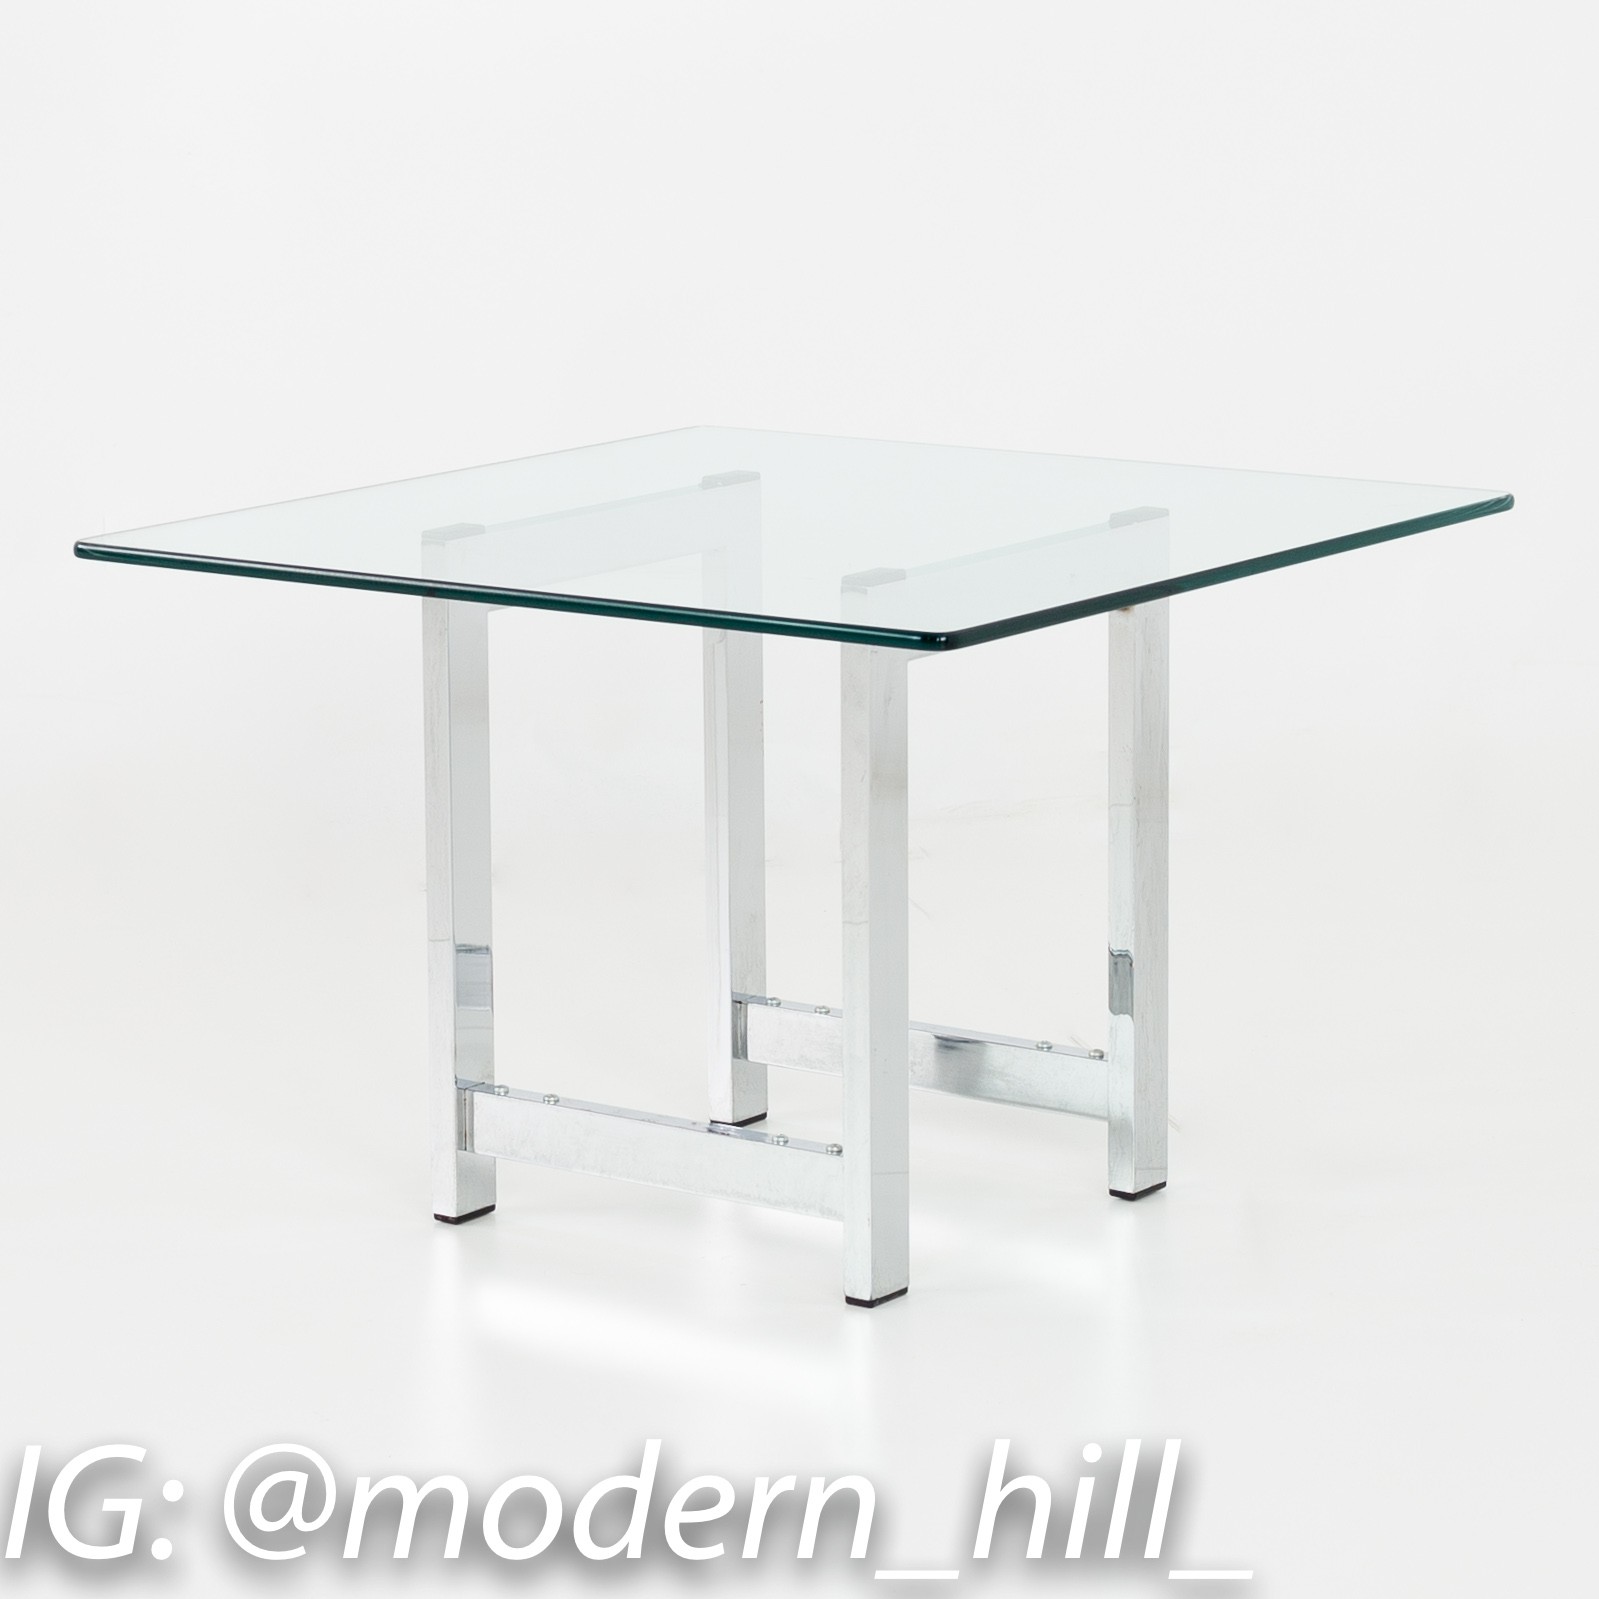 Milo Baughman Style Mid Century Chrome and Glass Side End Tables - Pair